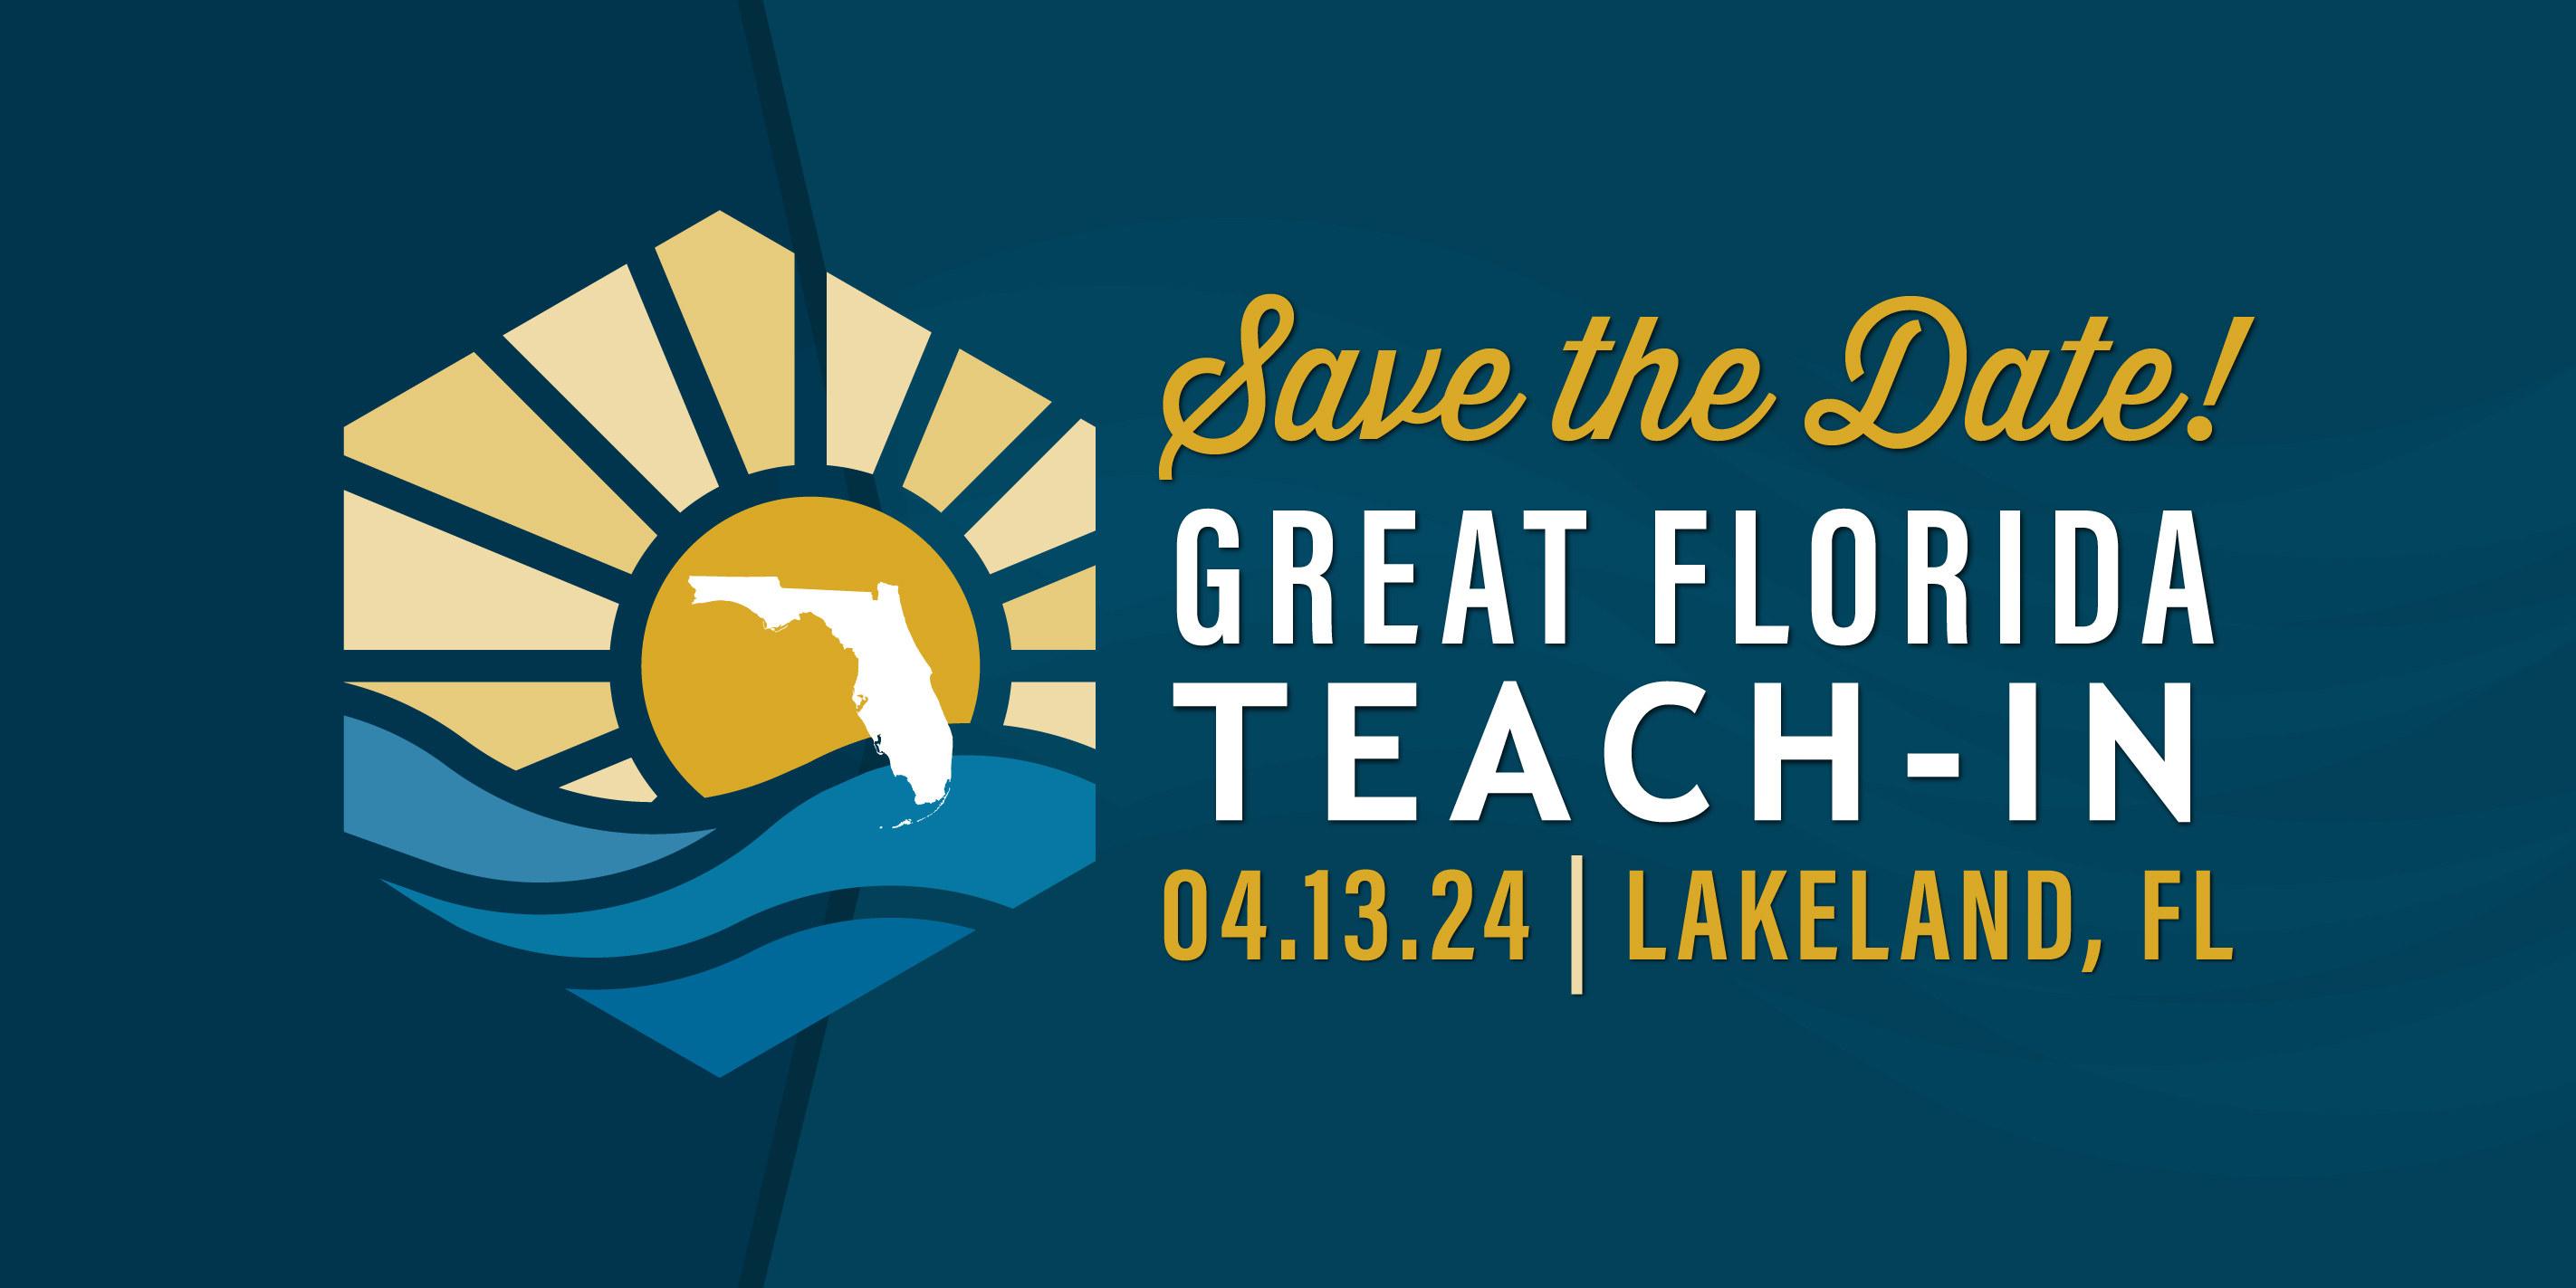 Save the Date! Great Florida Teach-In - April 13, 2024 - Lakeland, FL